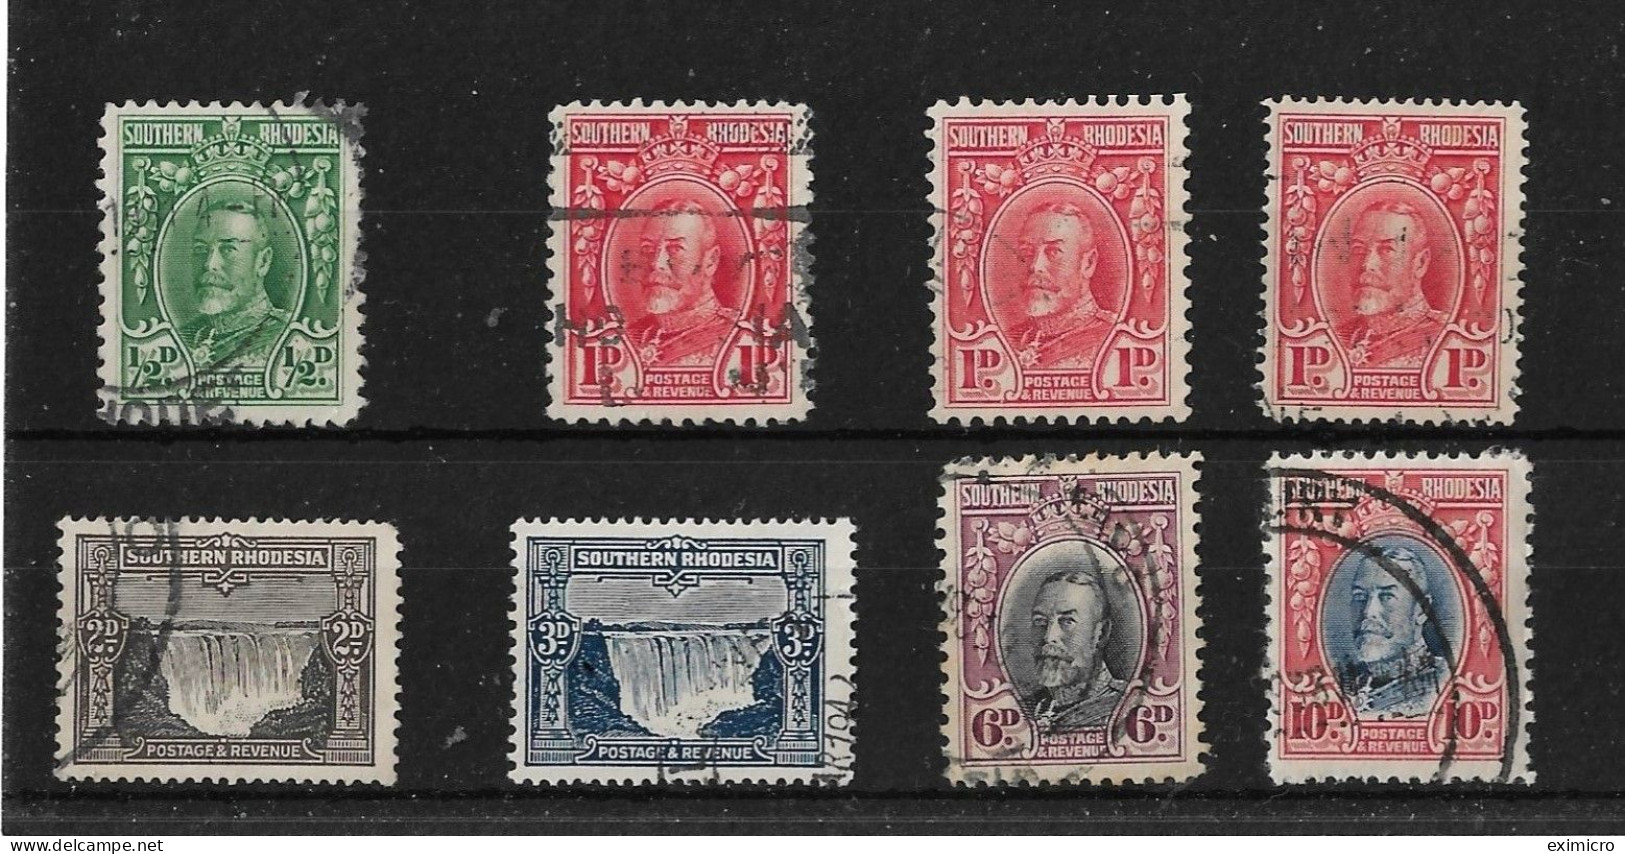 SOUTHERN RHODESIA 1931 - 1937 VALUES TO 10d SG 15,16,16a,16b,17,18,20,22 FINE USED Cat £25+ - Zuid-Rhodesië (...-1964)